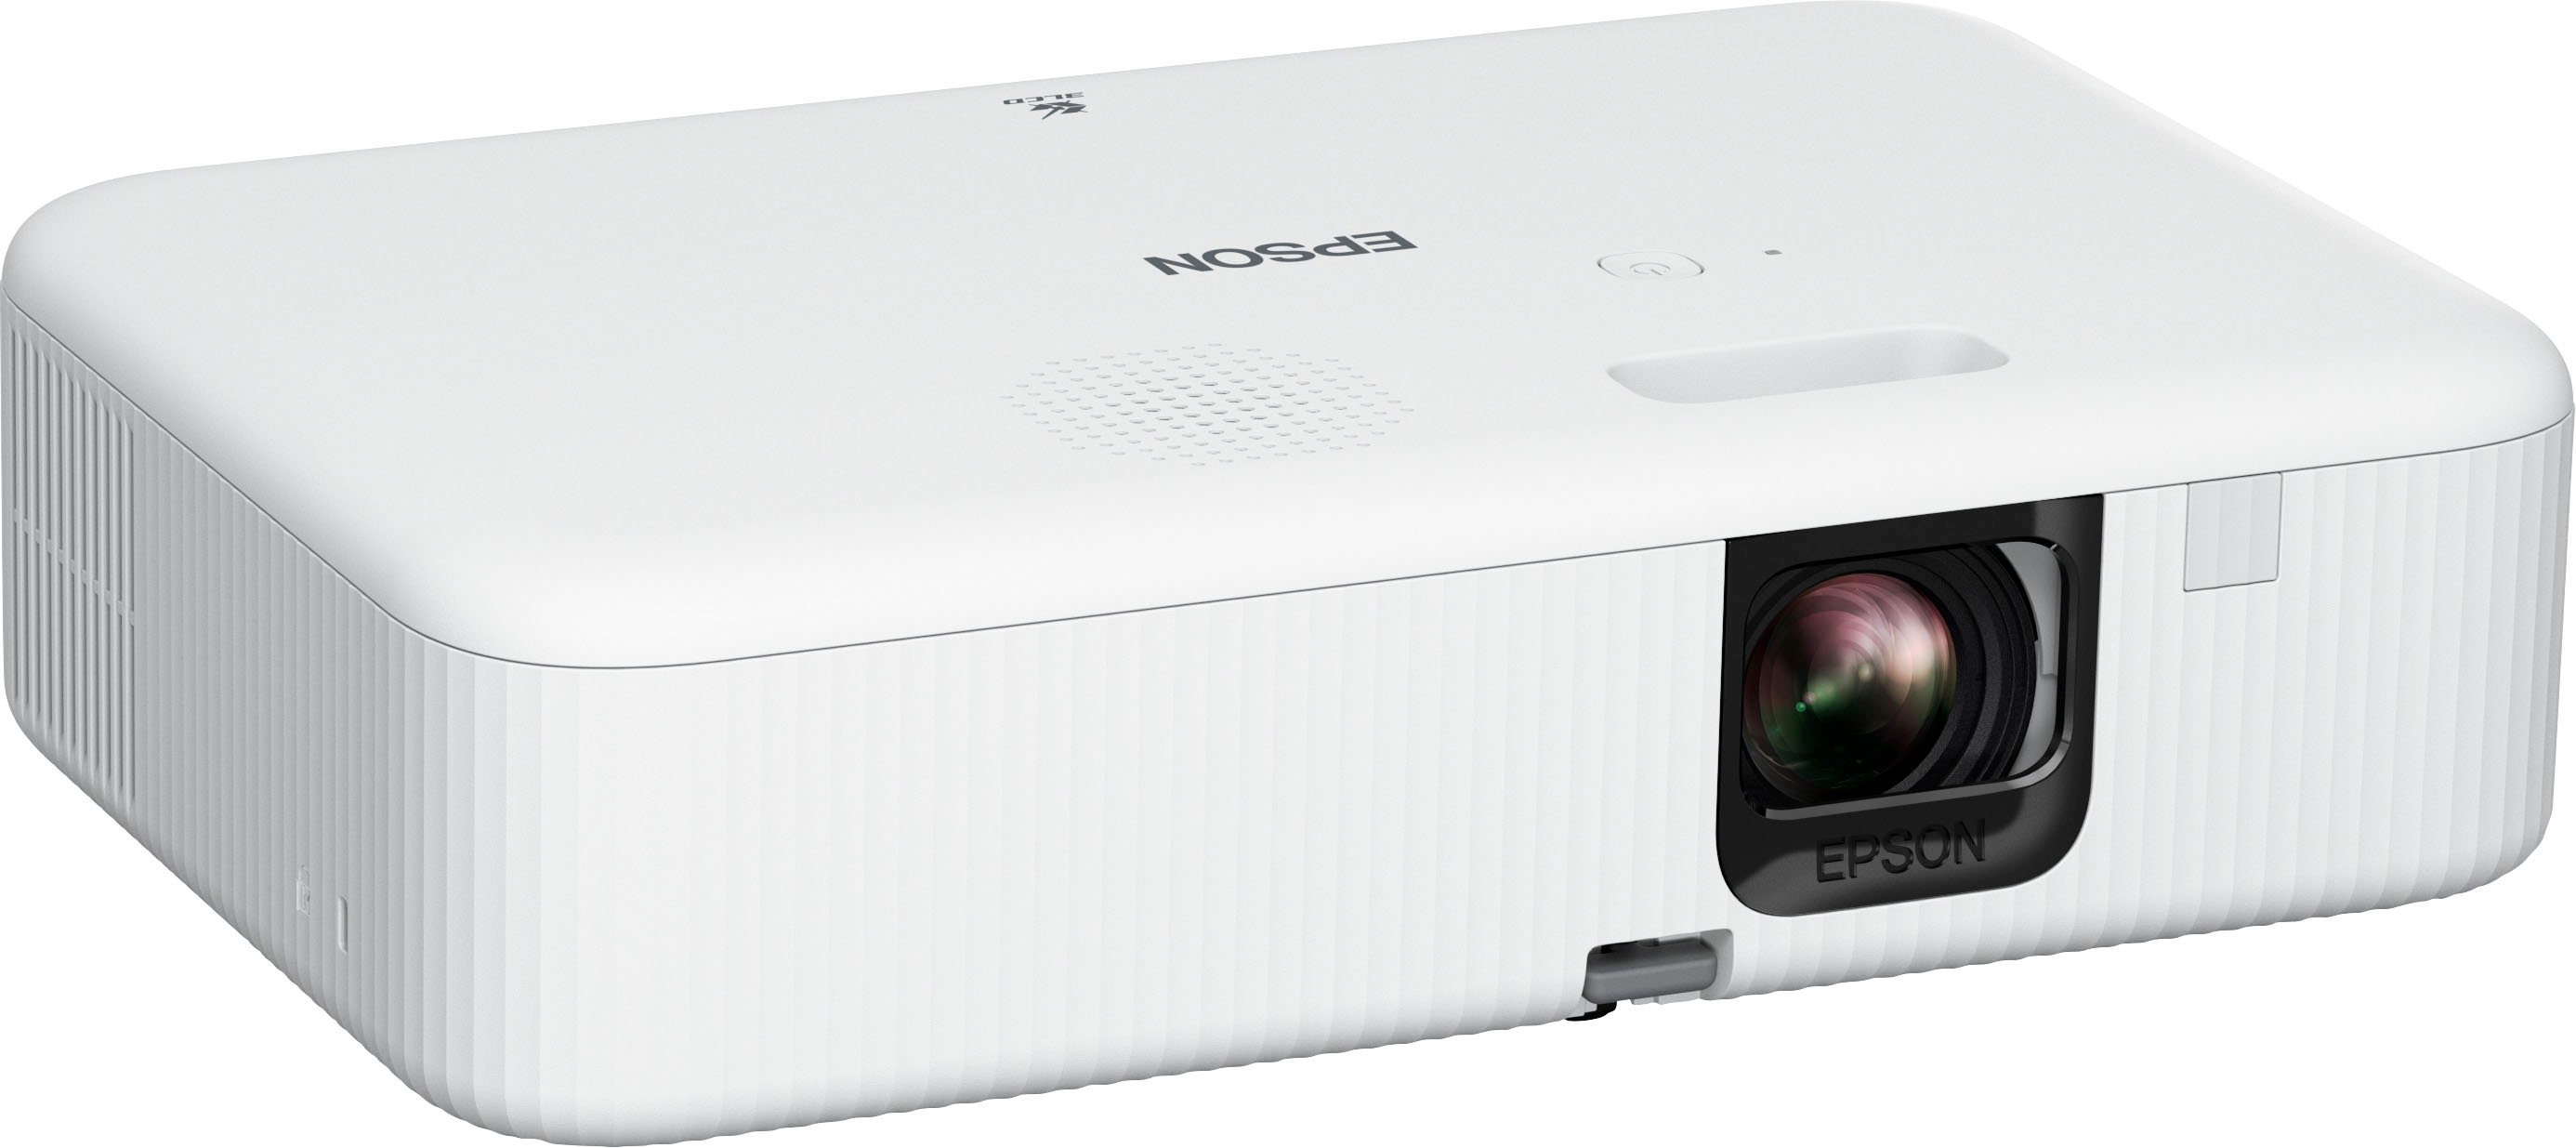 Angle View: Epson - EpiqVision Flex CO-FH02 Full HD 1080p Smart Streaming Portable Projector, 3-Chip 3LCD, Android TV, Bluetooth - White